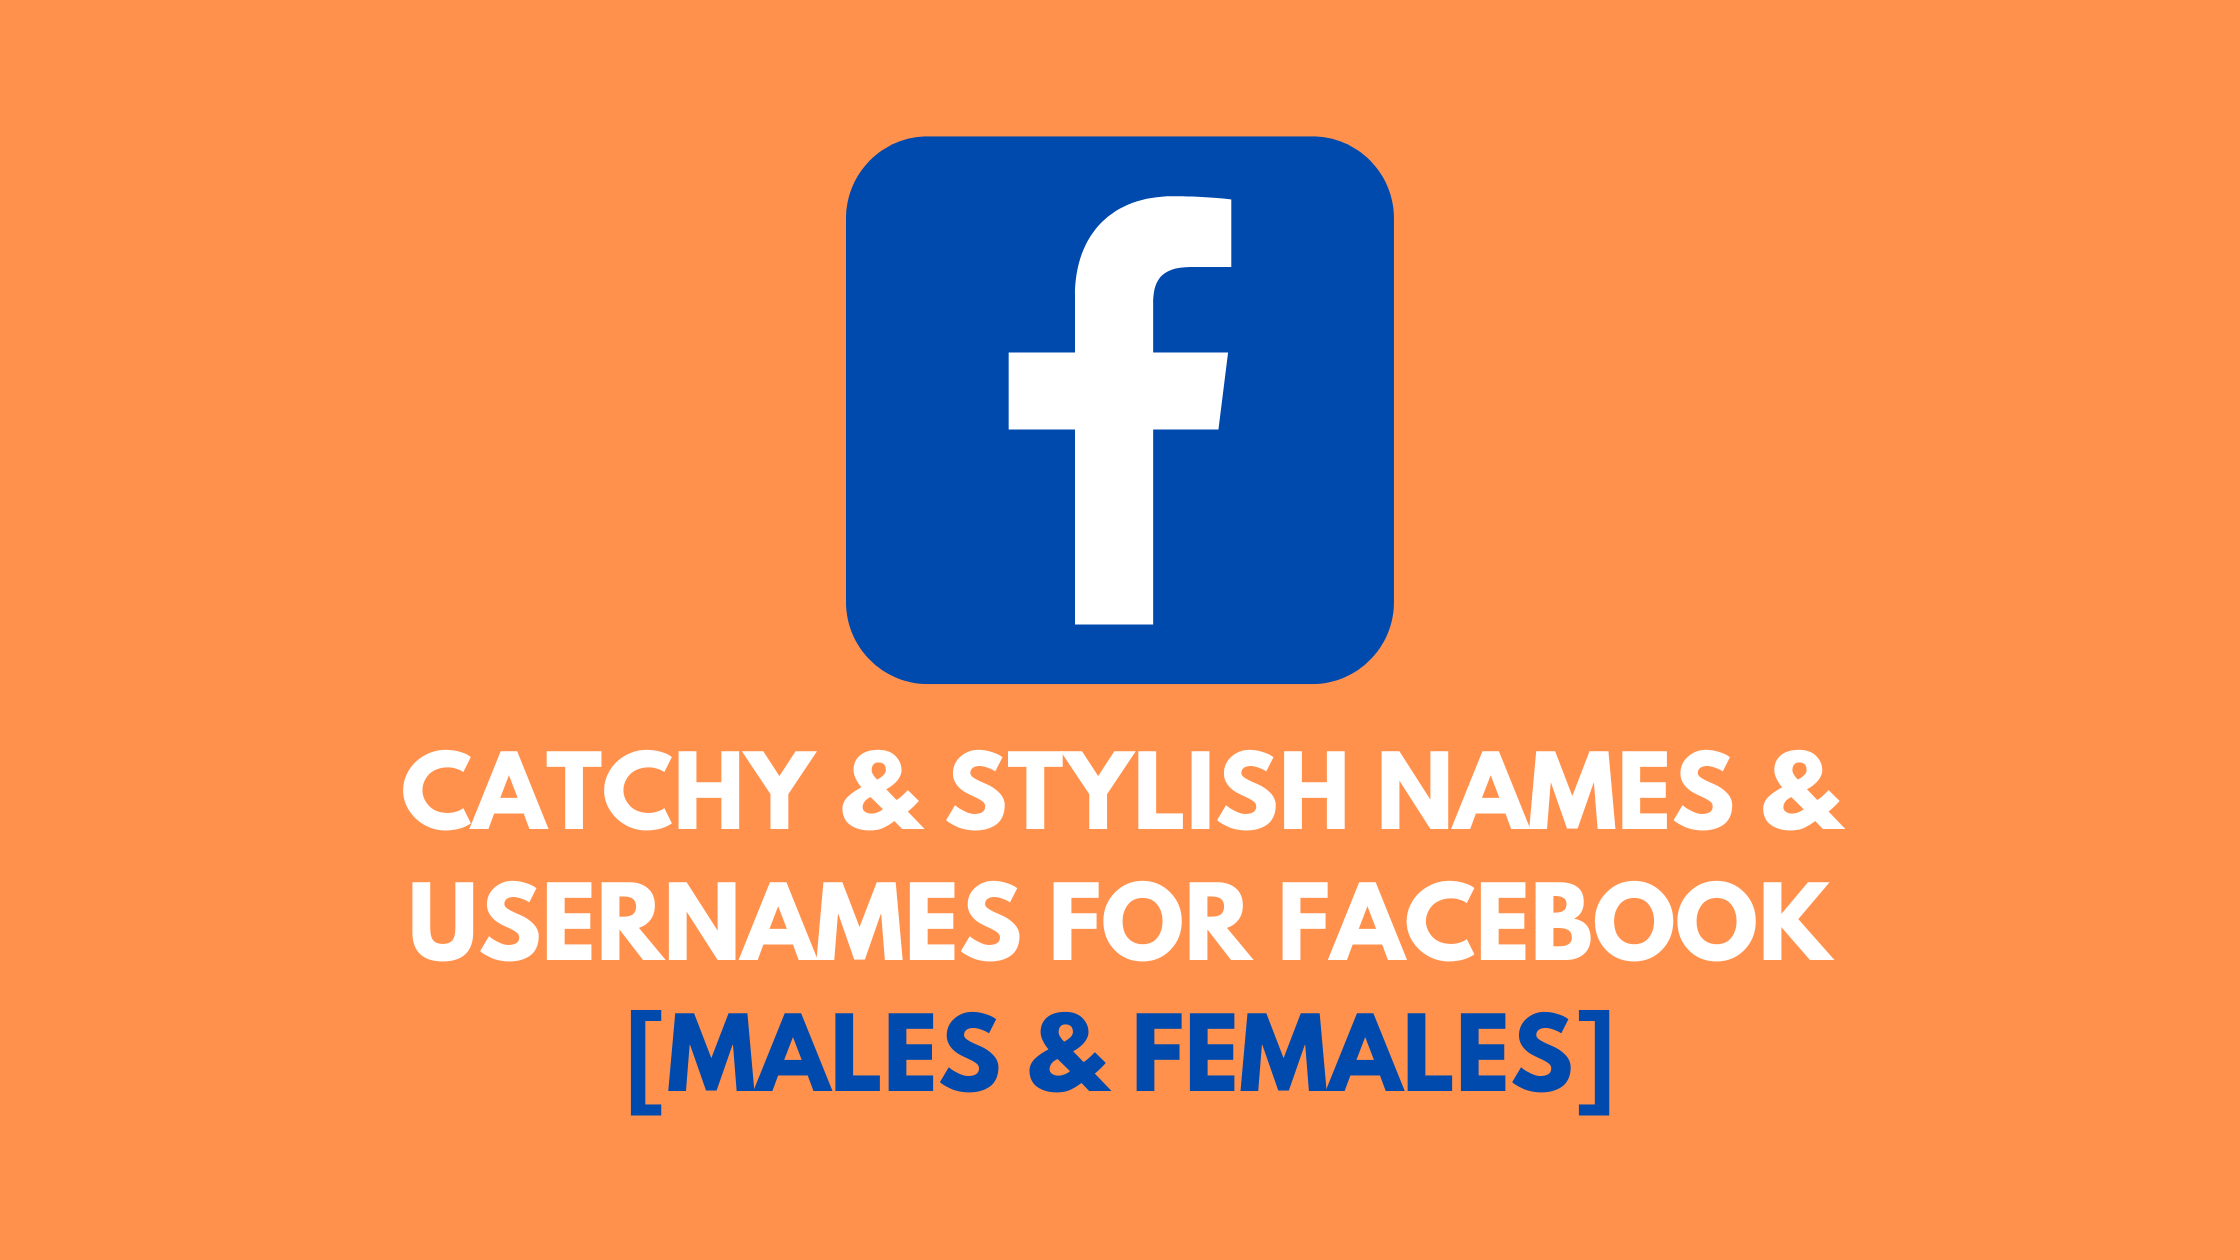 Catchy & Stylish Names & Usernames for Facebook [Males & Females]